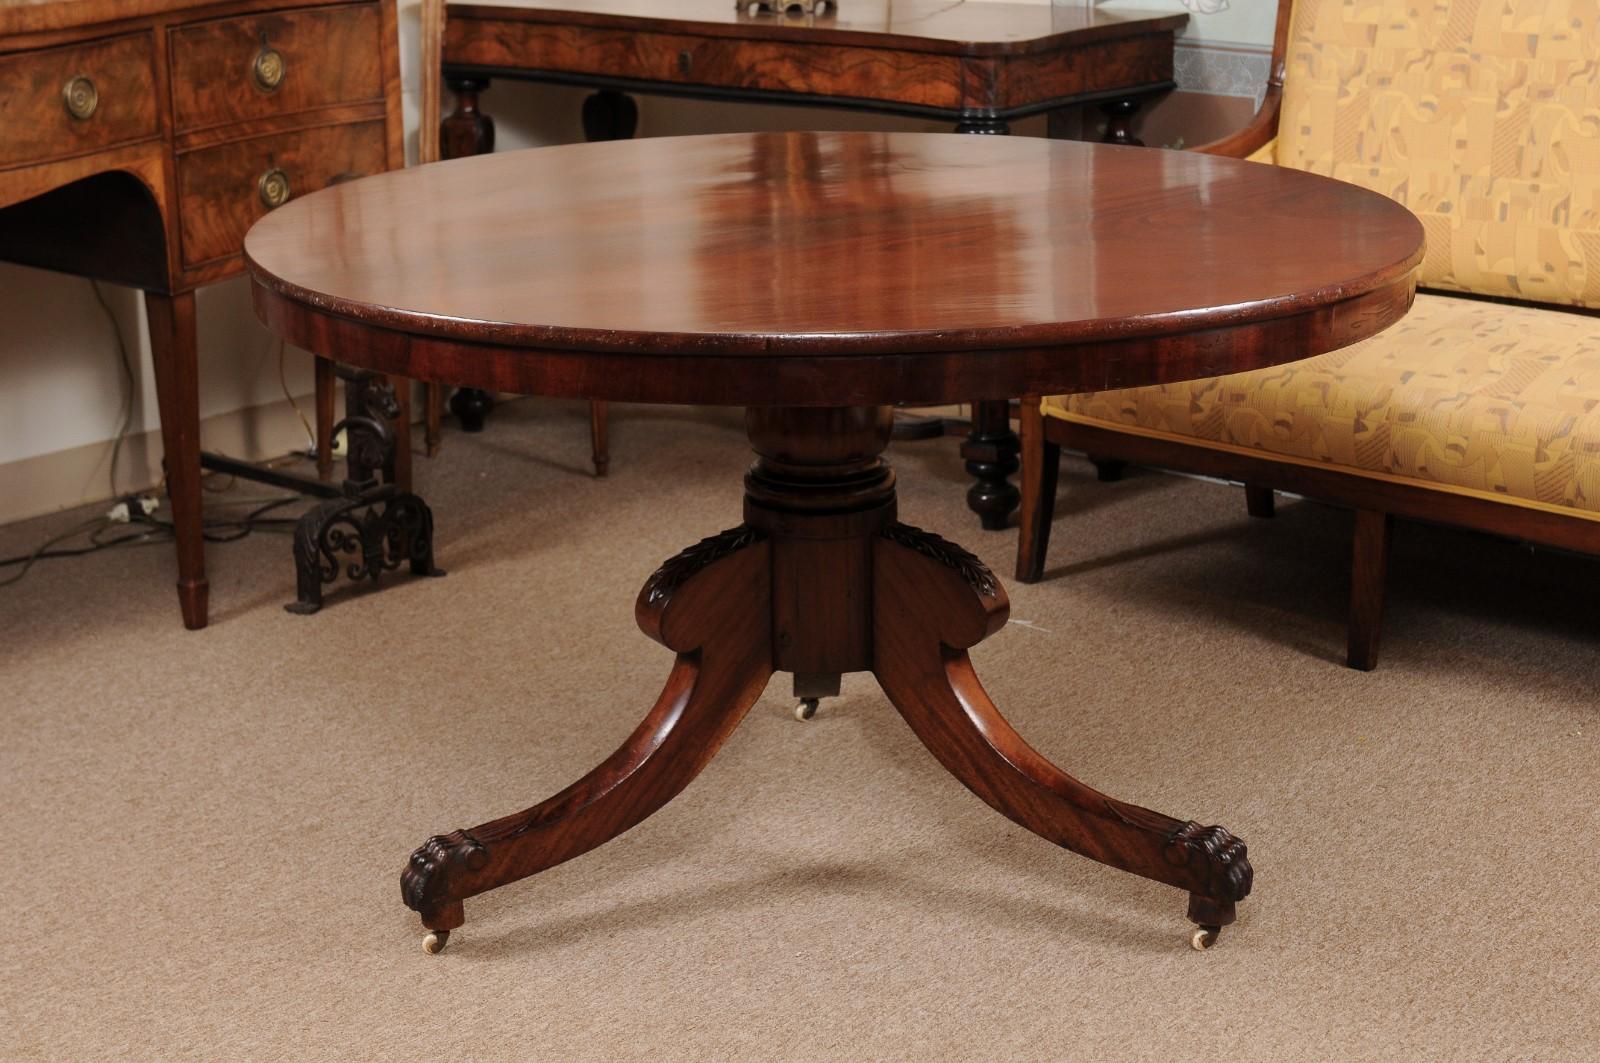 19th Century English Mahogany Center Table with Pedestal Base & 3 Splayed Legs with Paw Feet